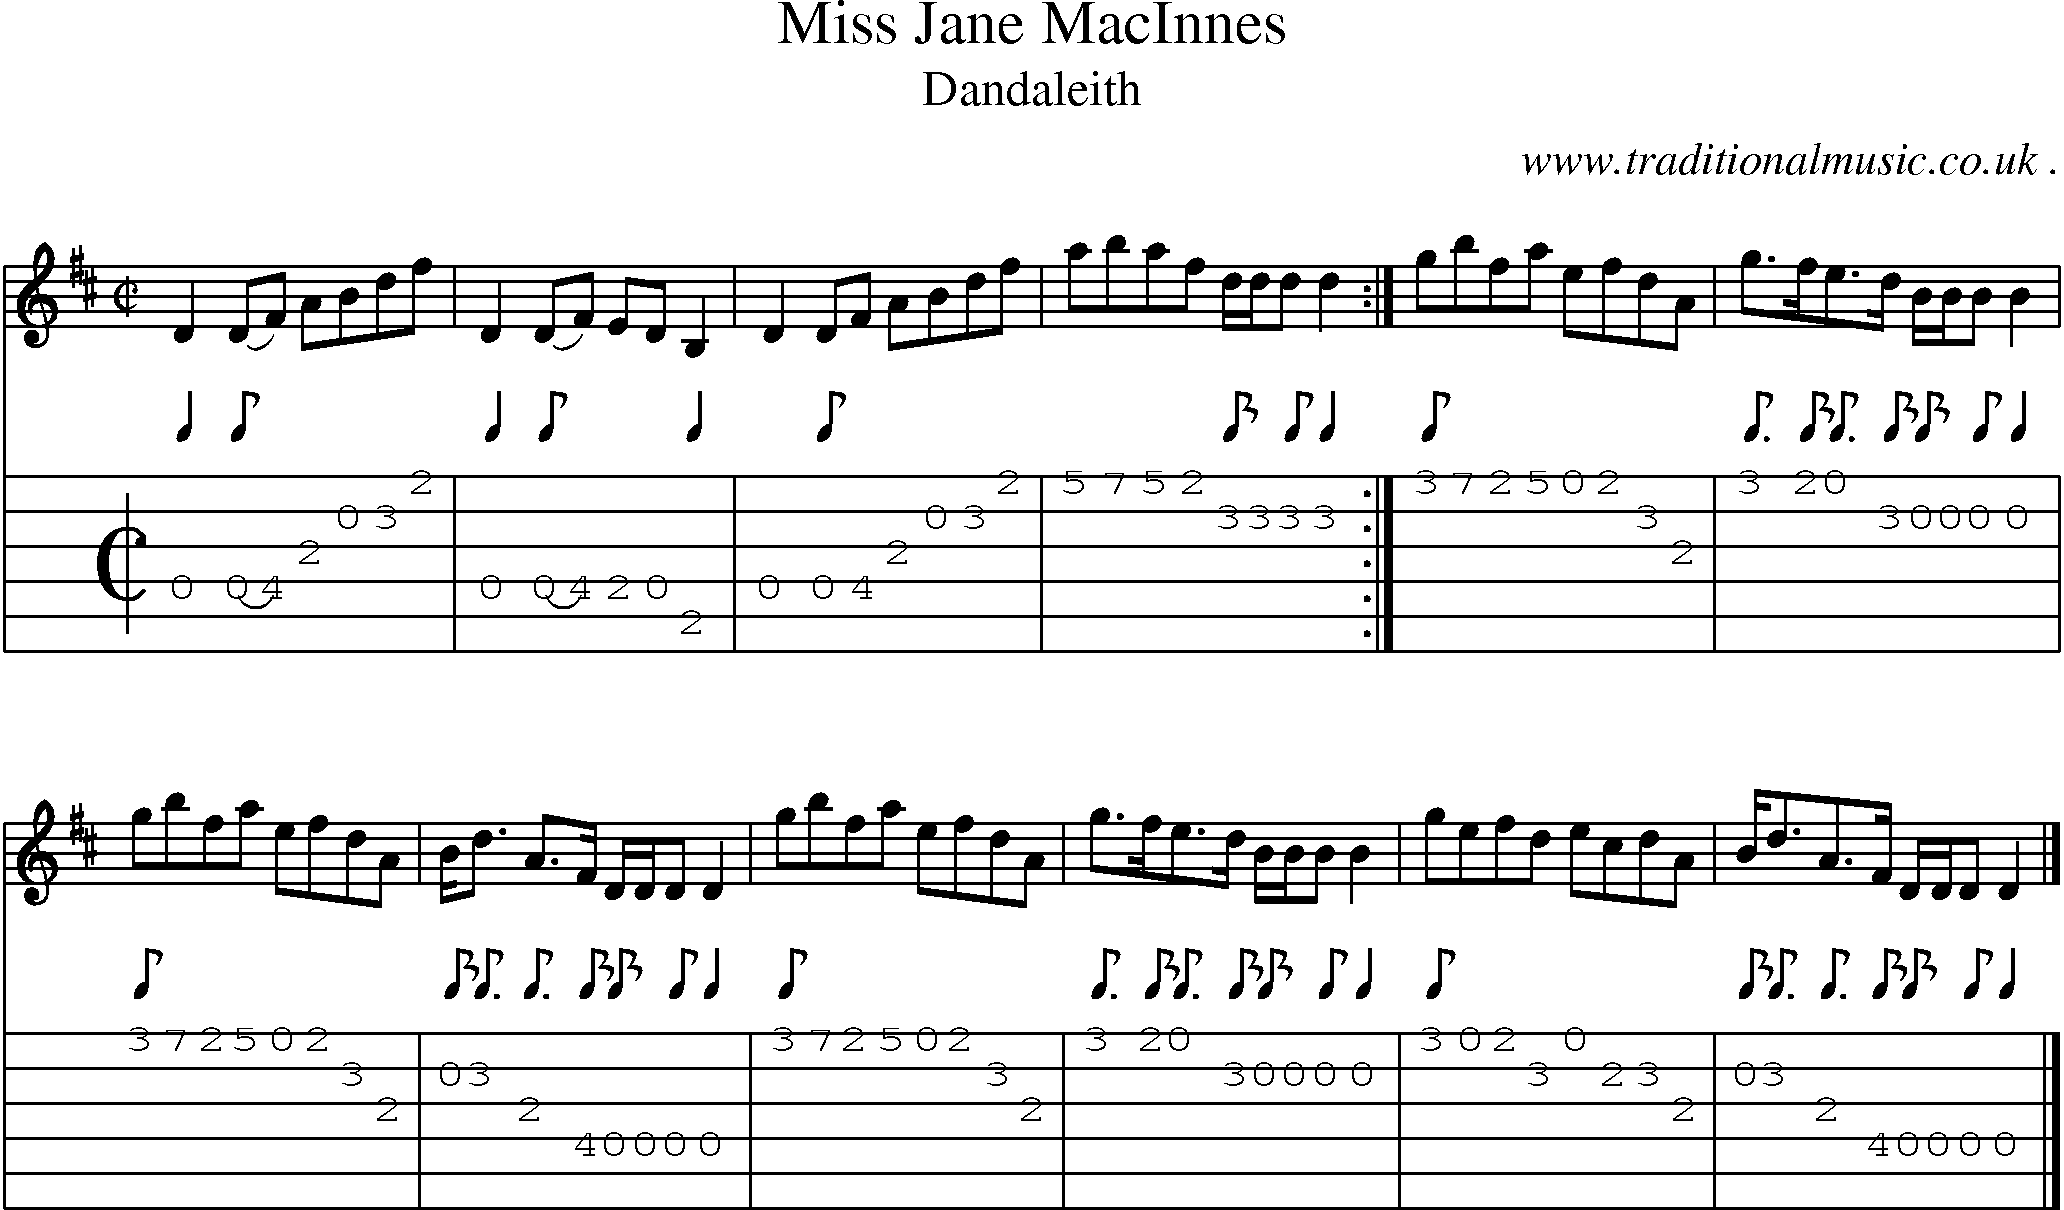 Sheet-music  score, Chords and Guitar Tabs for Miss Jane Macinnes